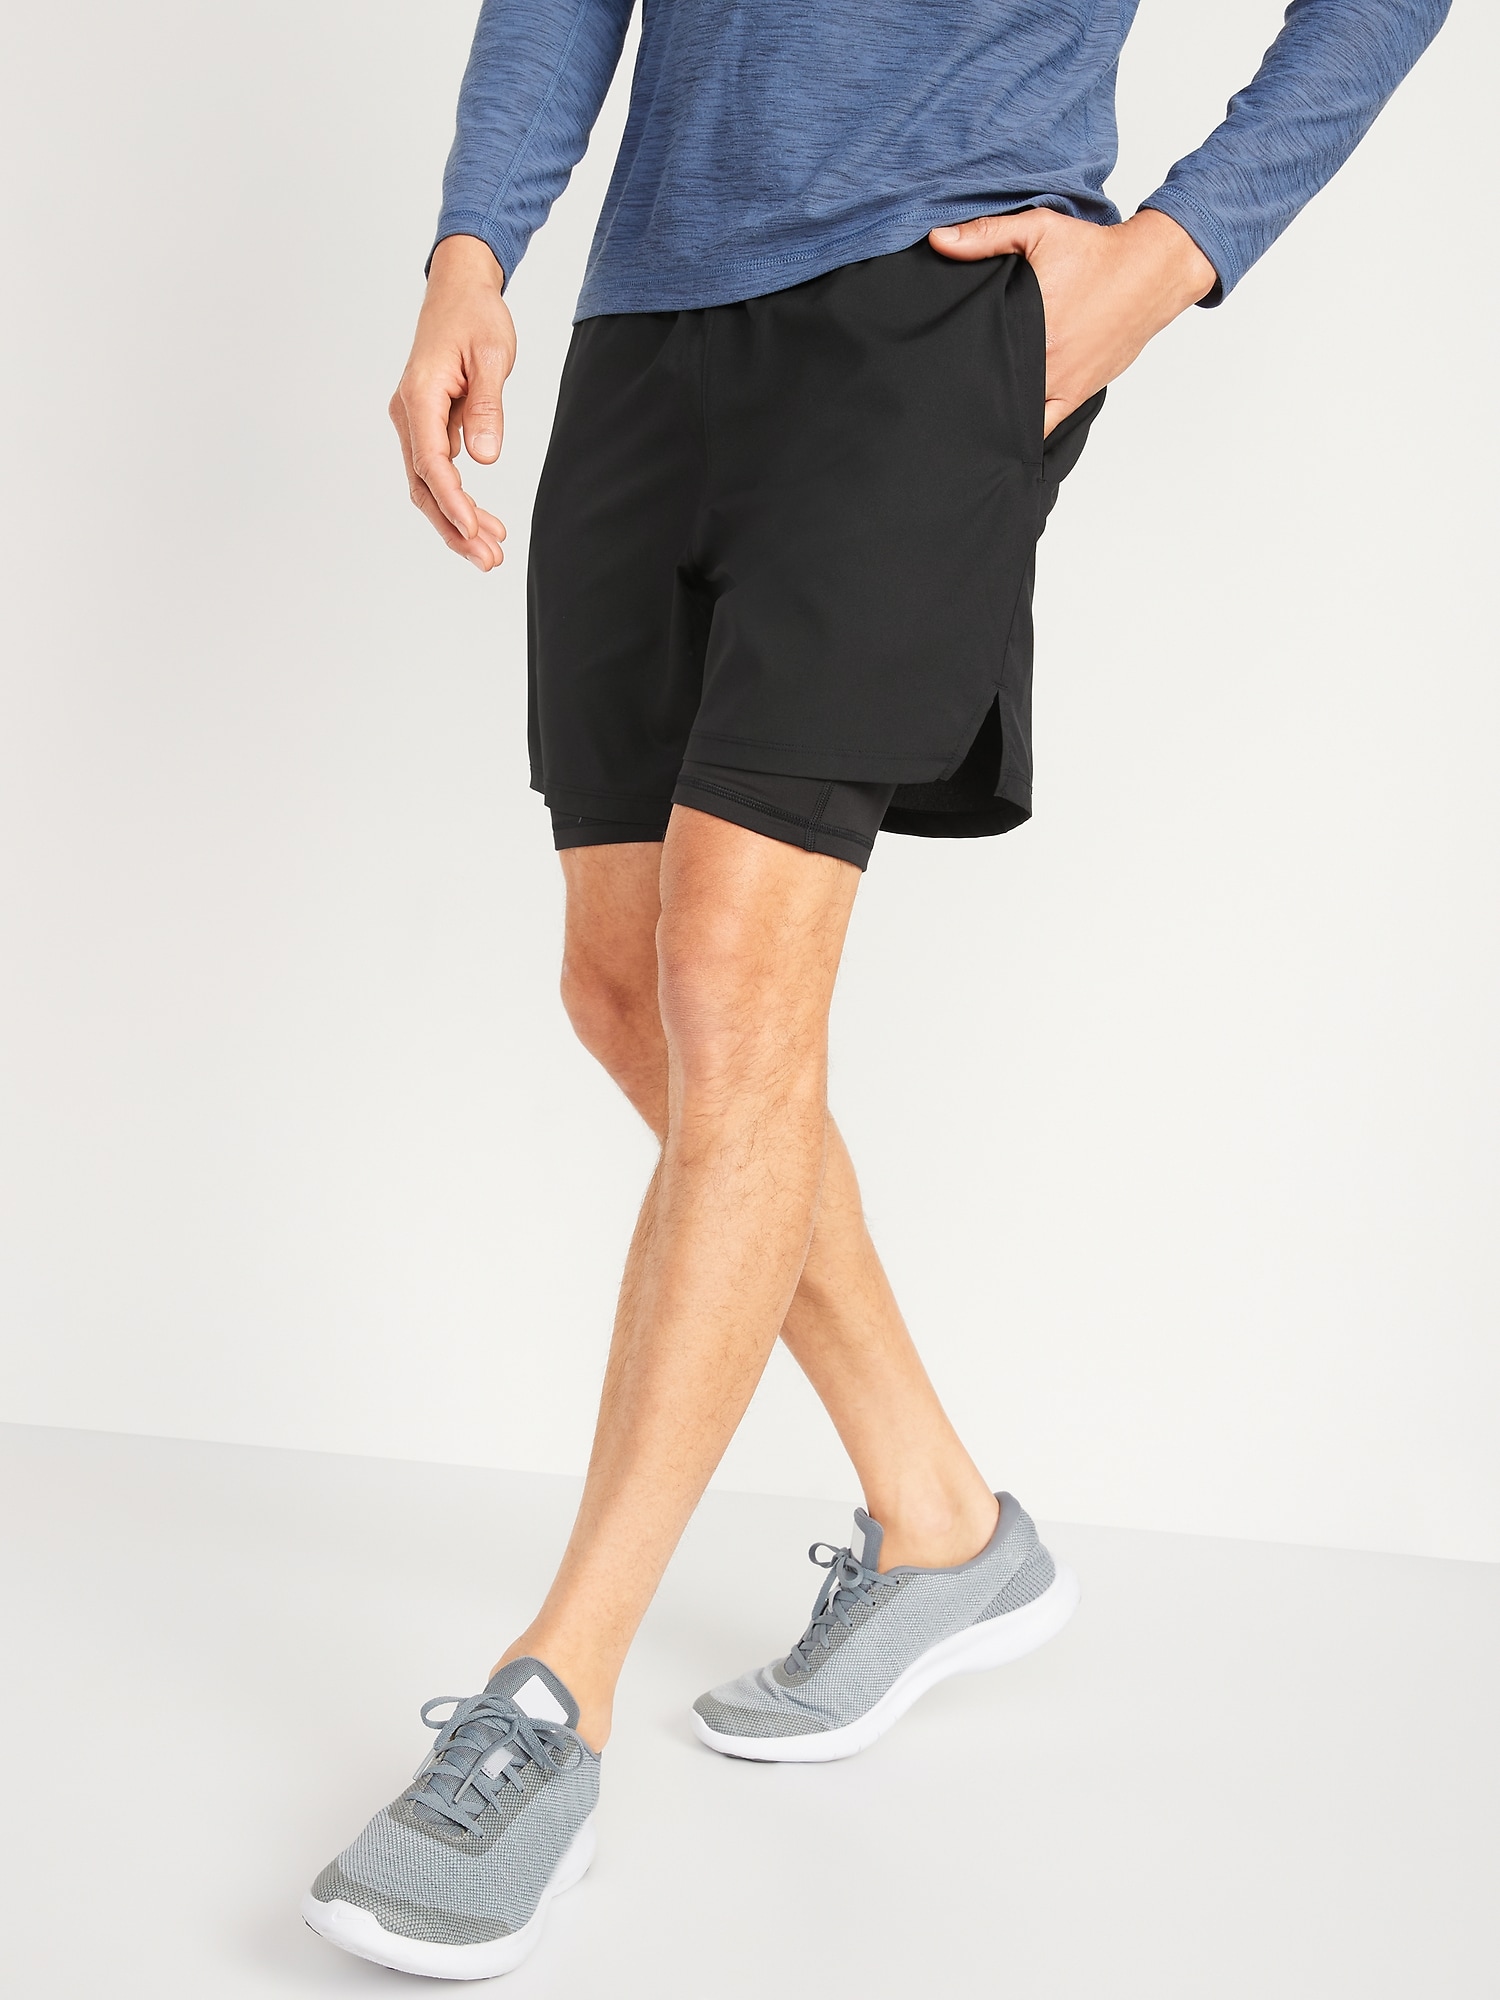 Old Navy Go 2-in-1 Workout Shorts + Base Layer -- 7-inch inseam gray. 1